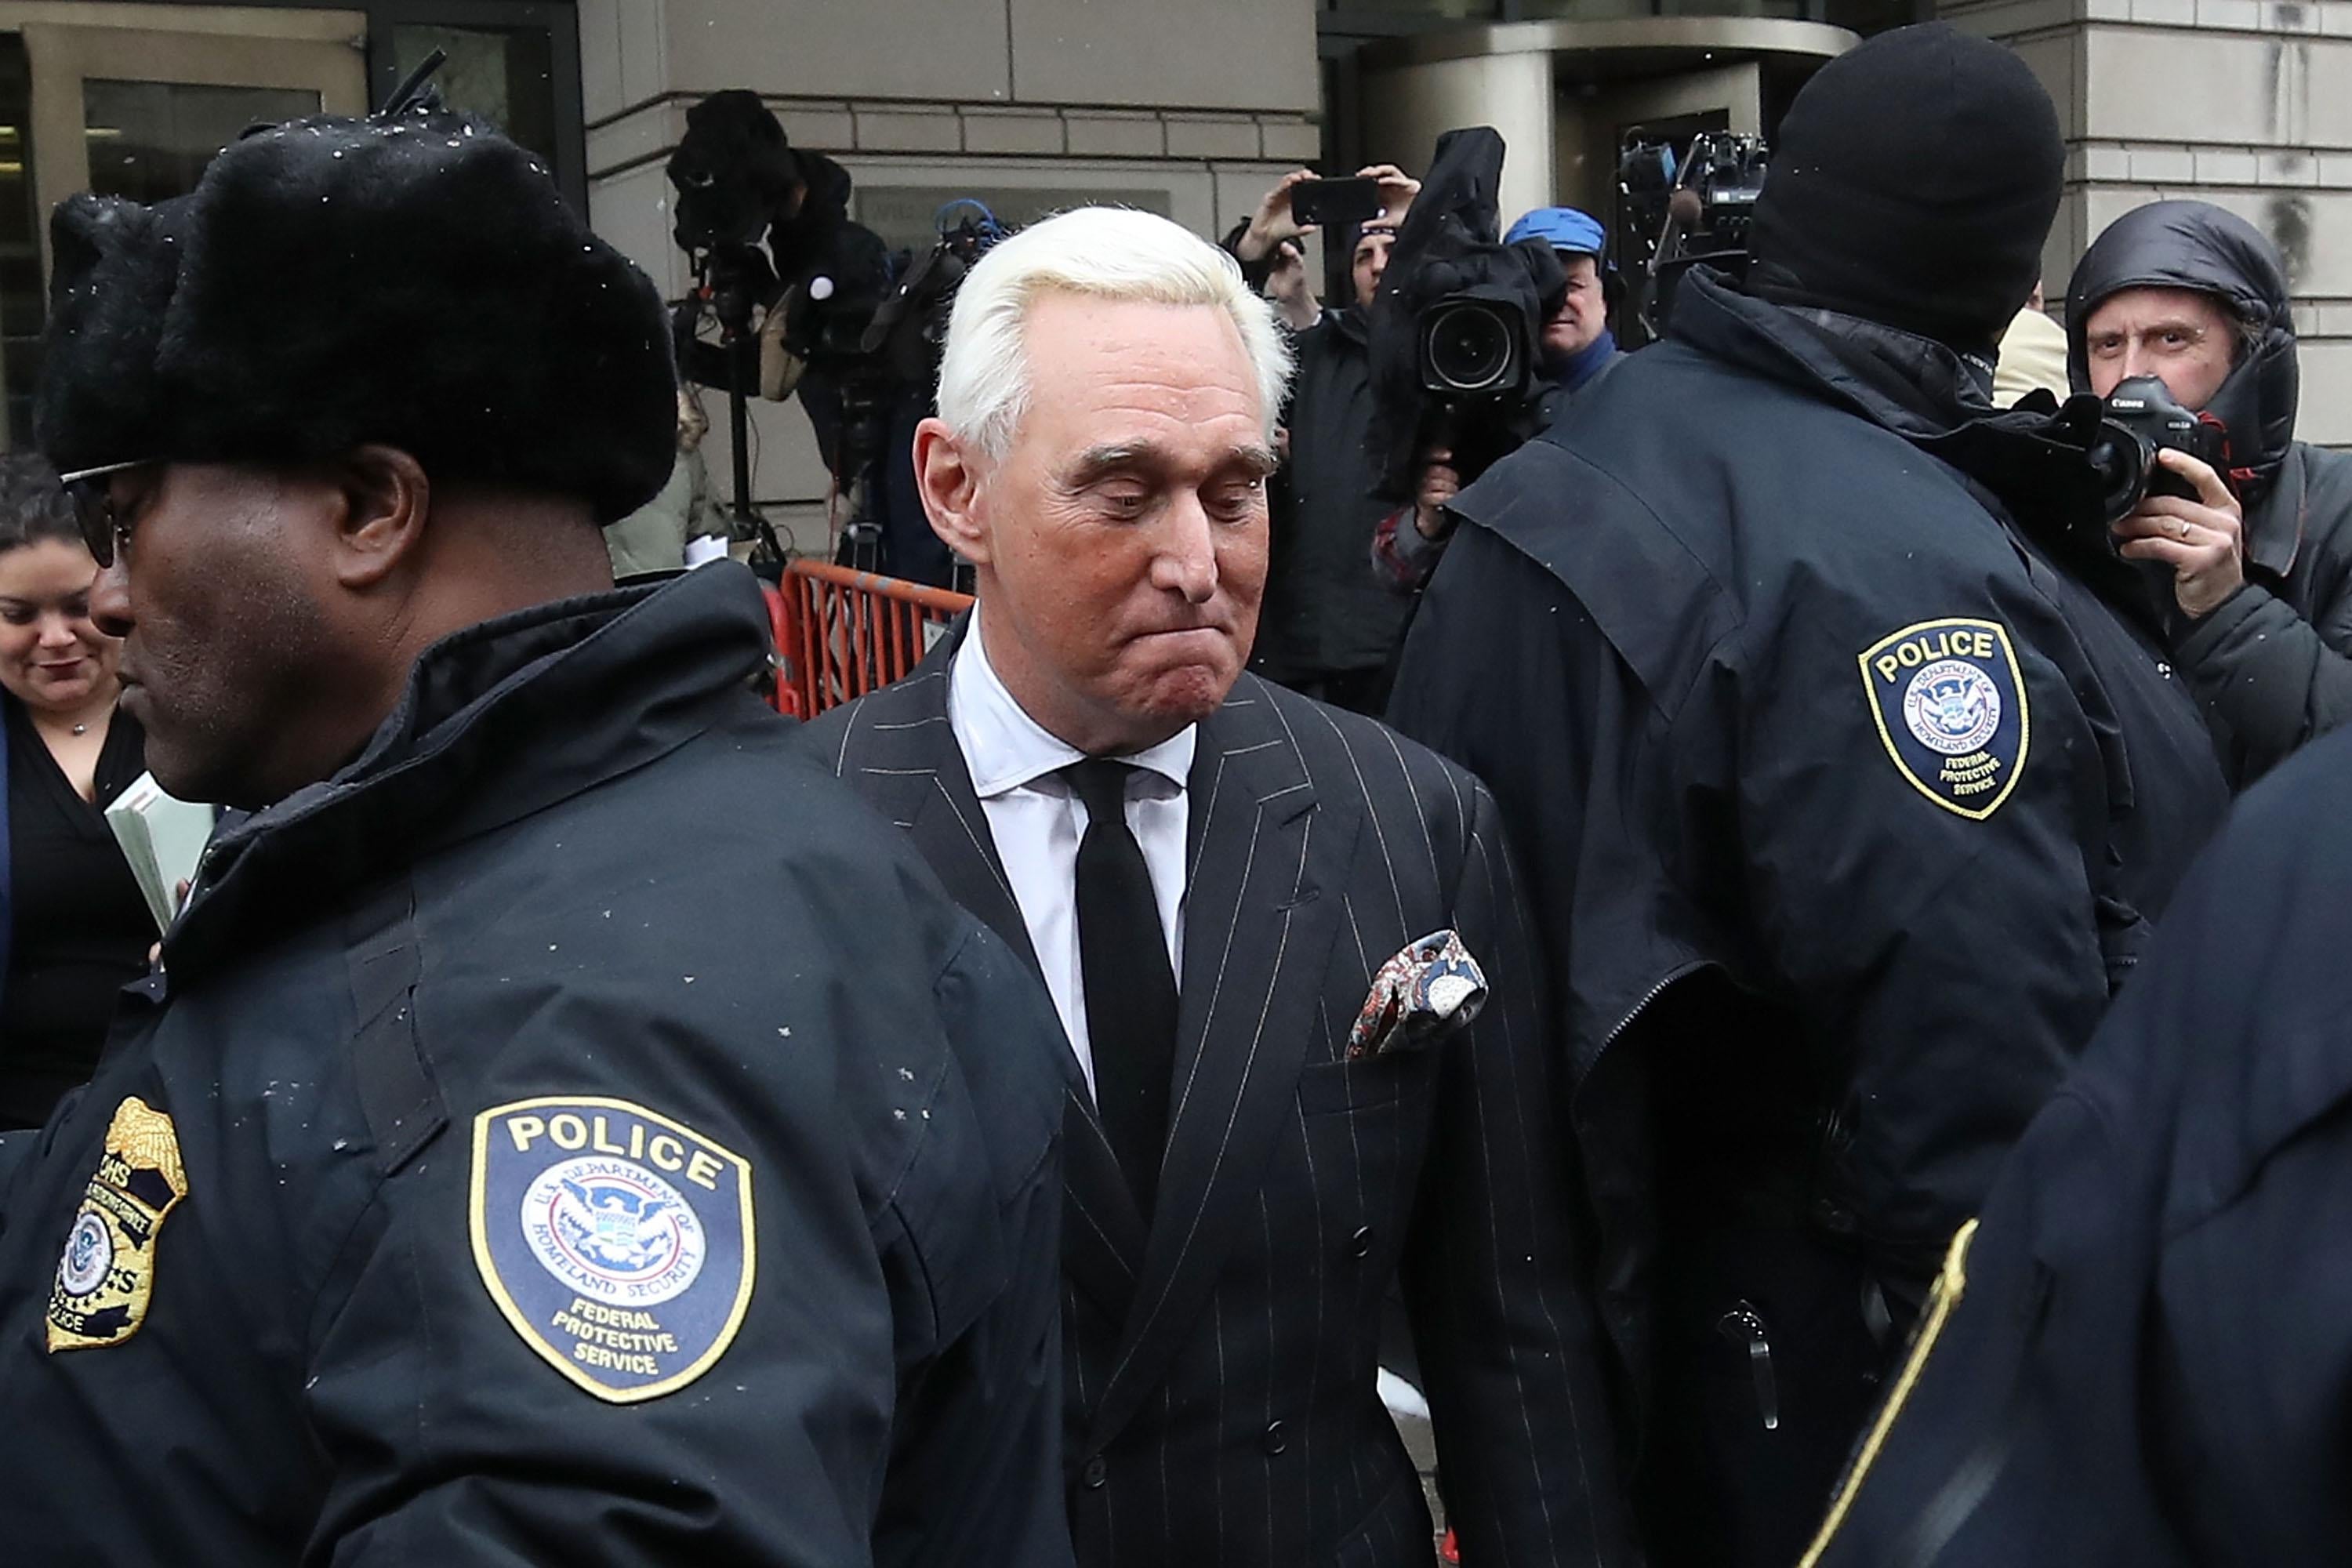 Roger Stone glances downward as he moves through a crowd of police and media in front of the courthouse.